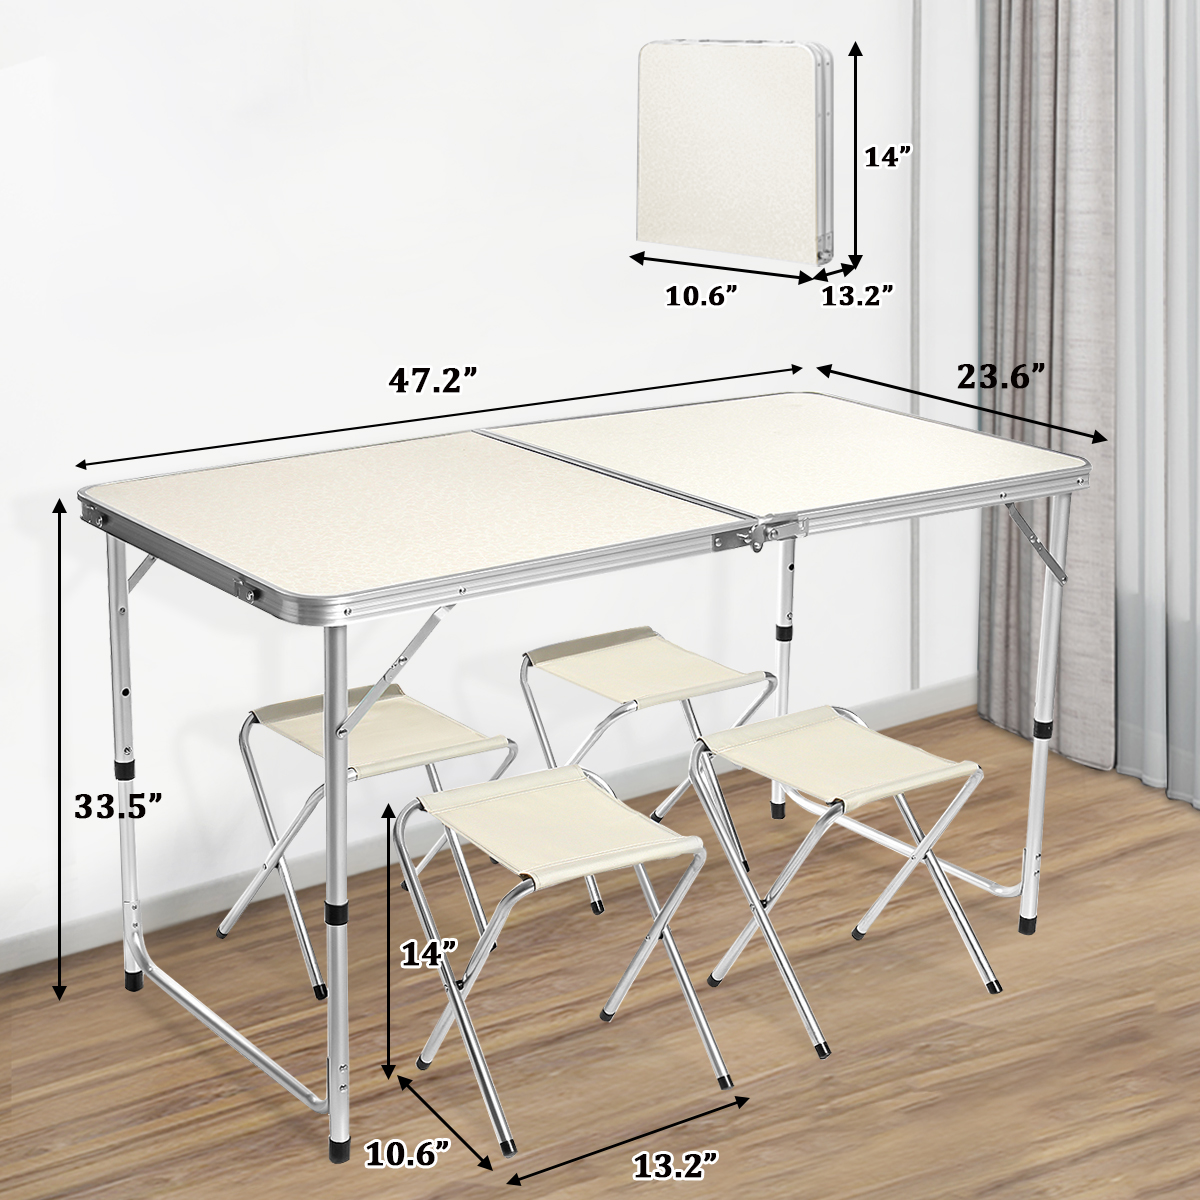 Folding Table 4ft Aluminum Camping Table Chair Set, Portable Picnic Card Table, Three Heights Adjustable Legs-47.24''x23.62'' - image 3 of 10